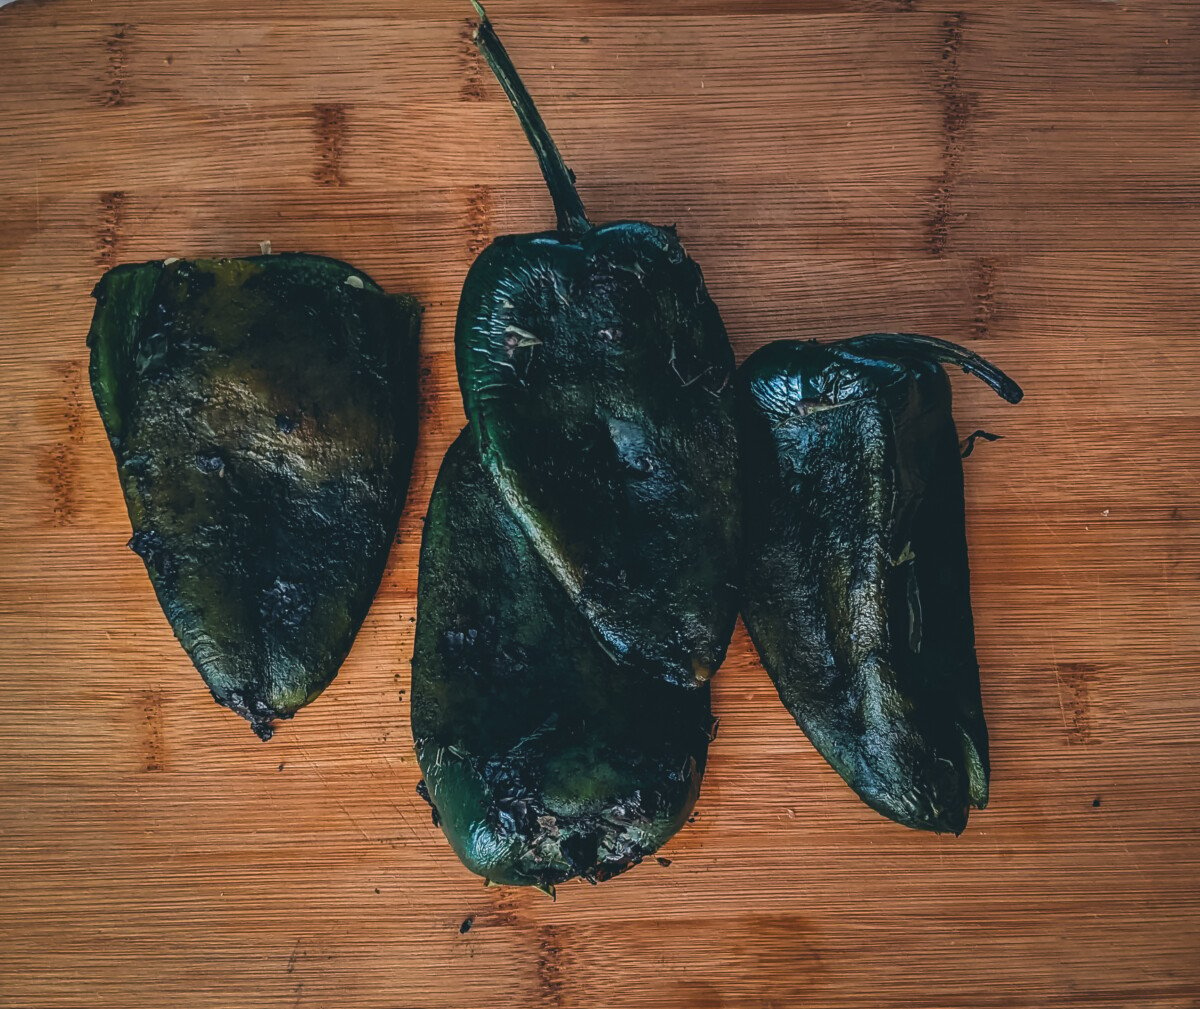 Pile of peppers showing charred skins. 